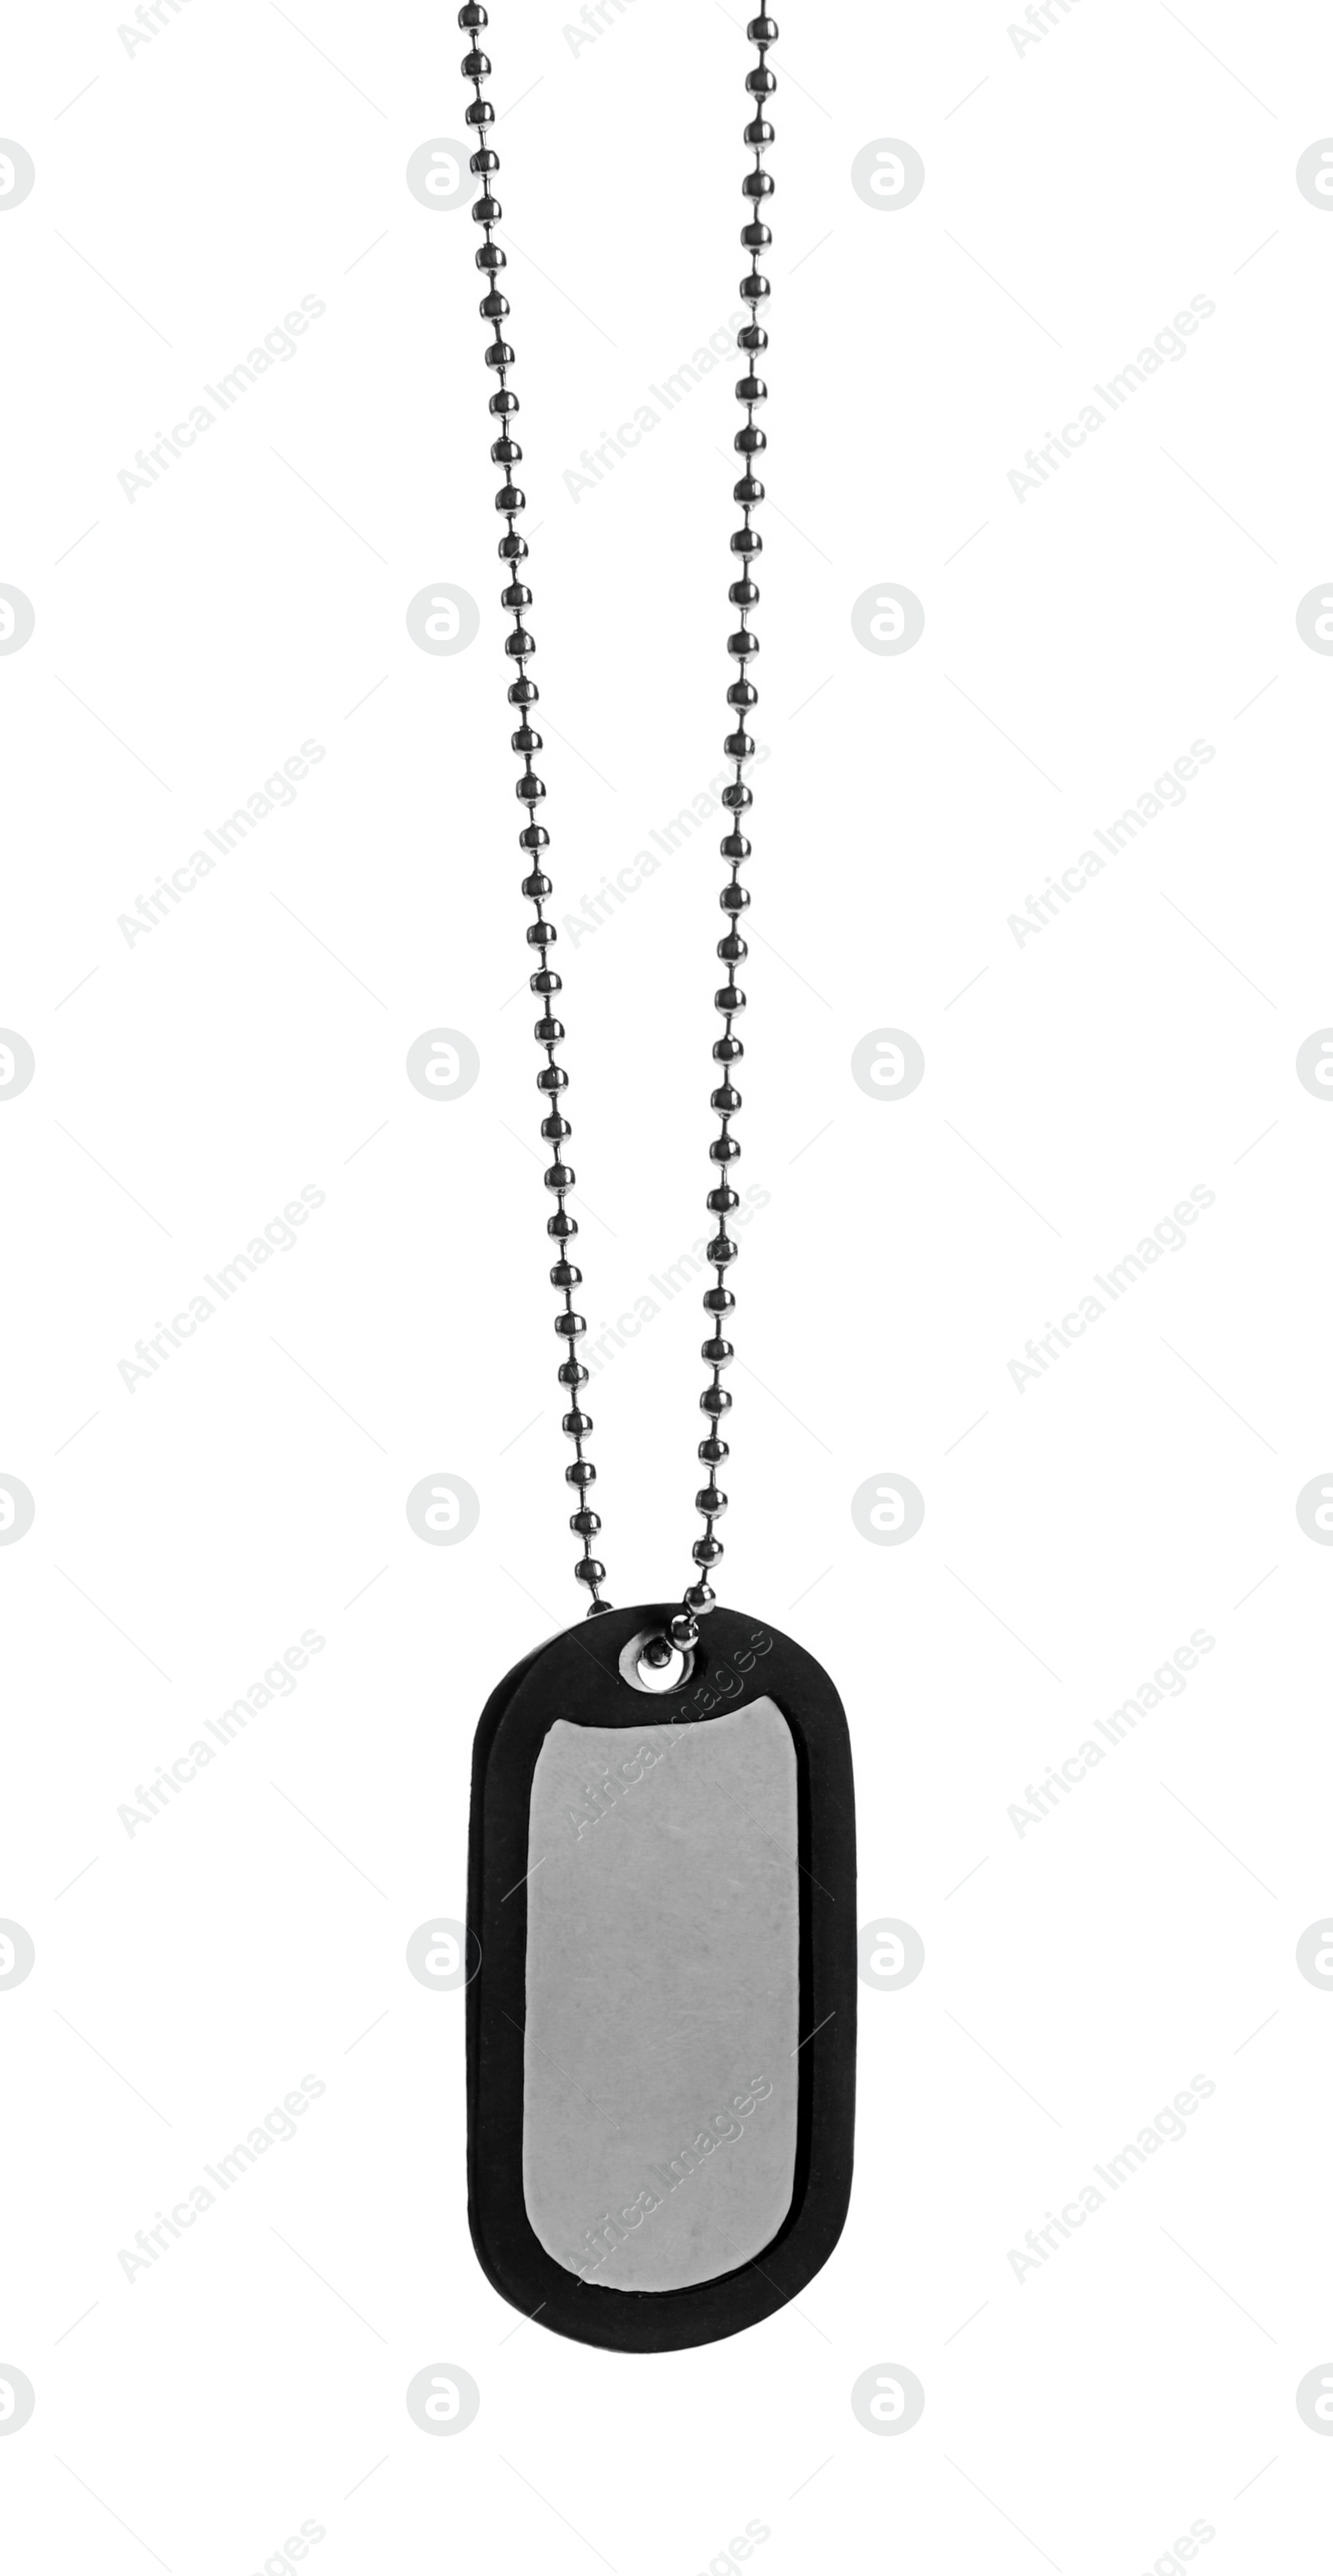 Photo of Military ID tag on white background